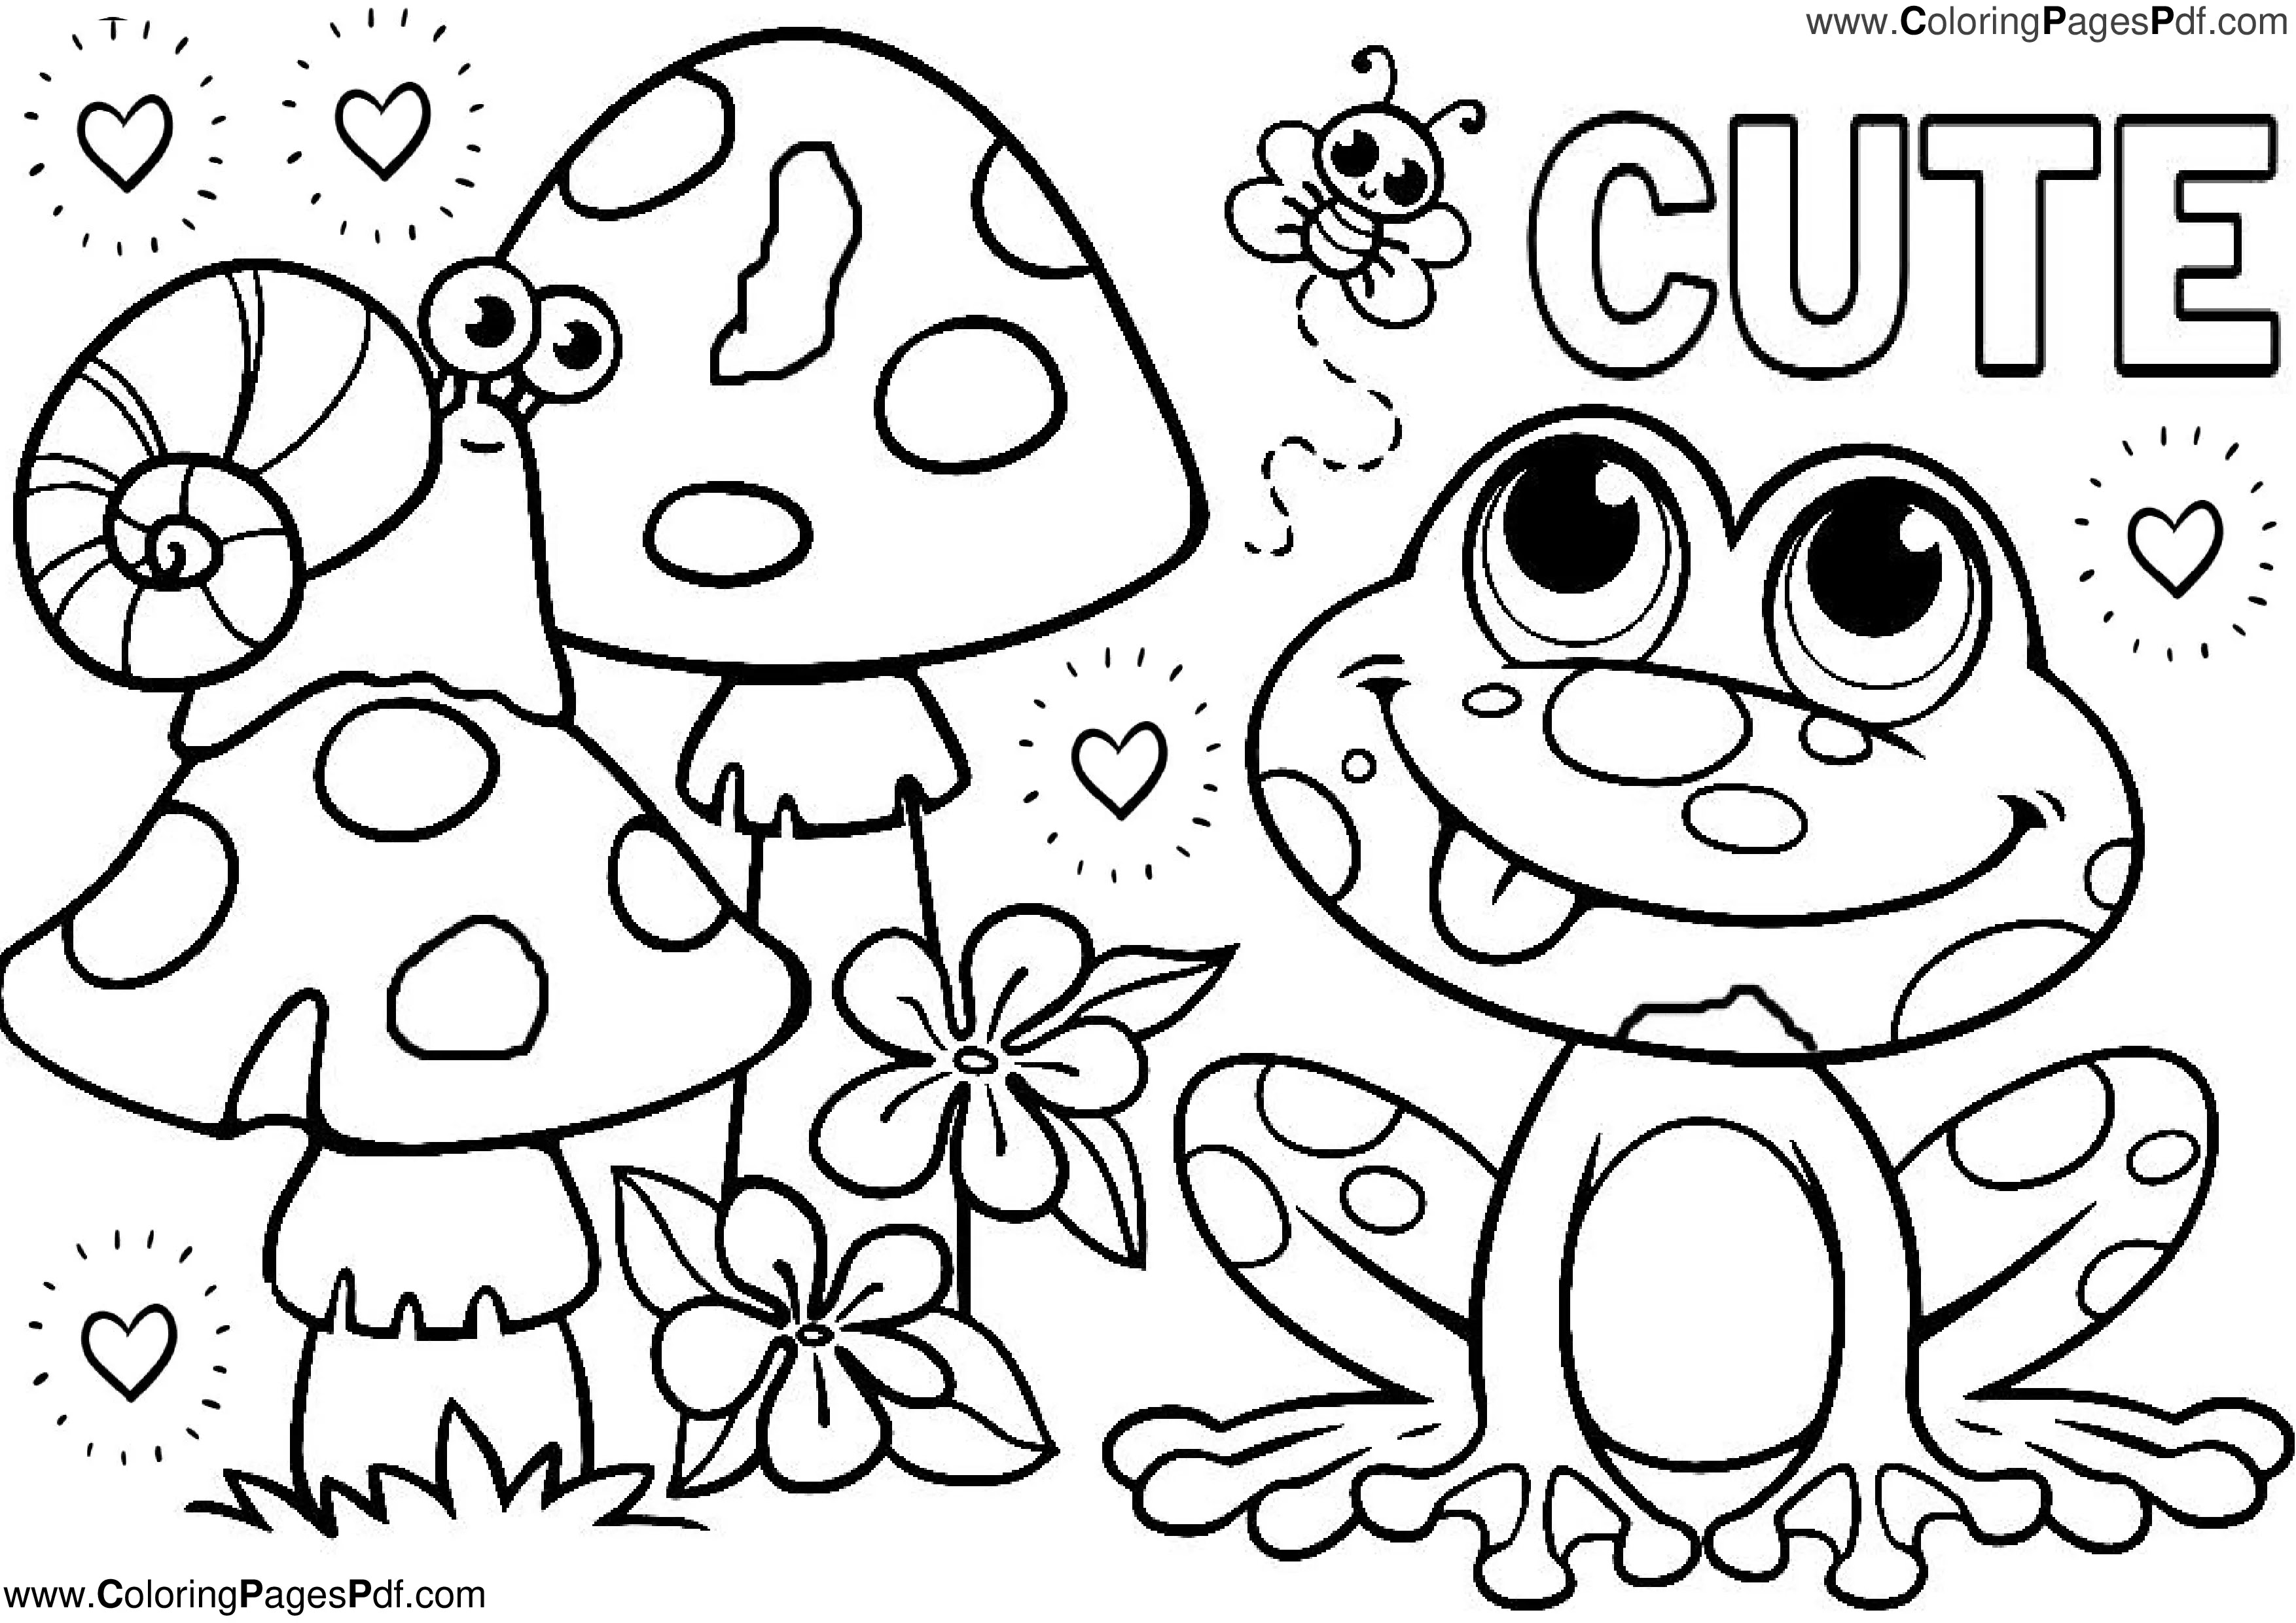 Preschool frog coloring pages